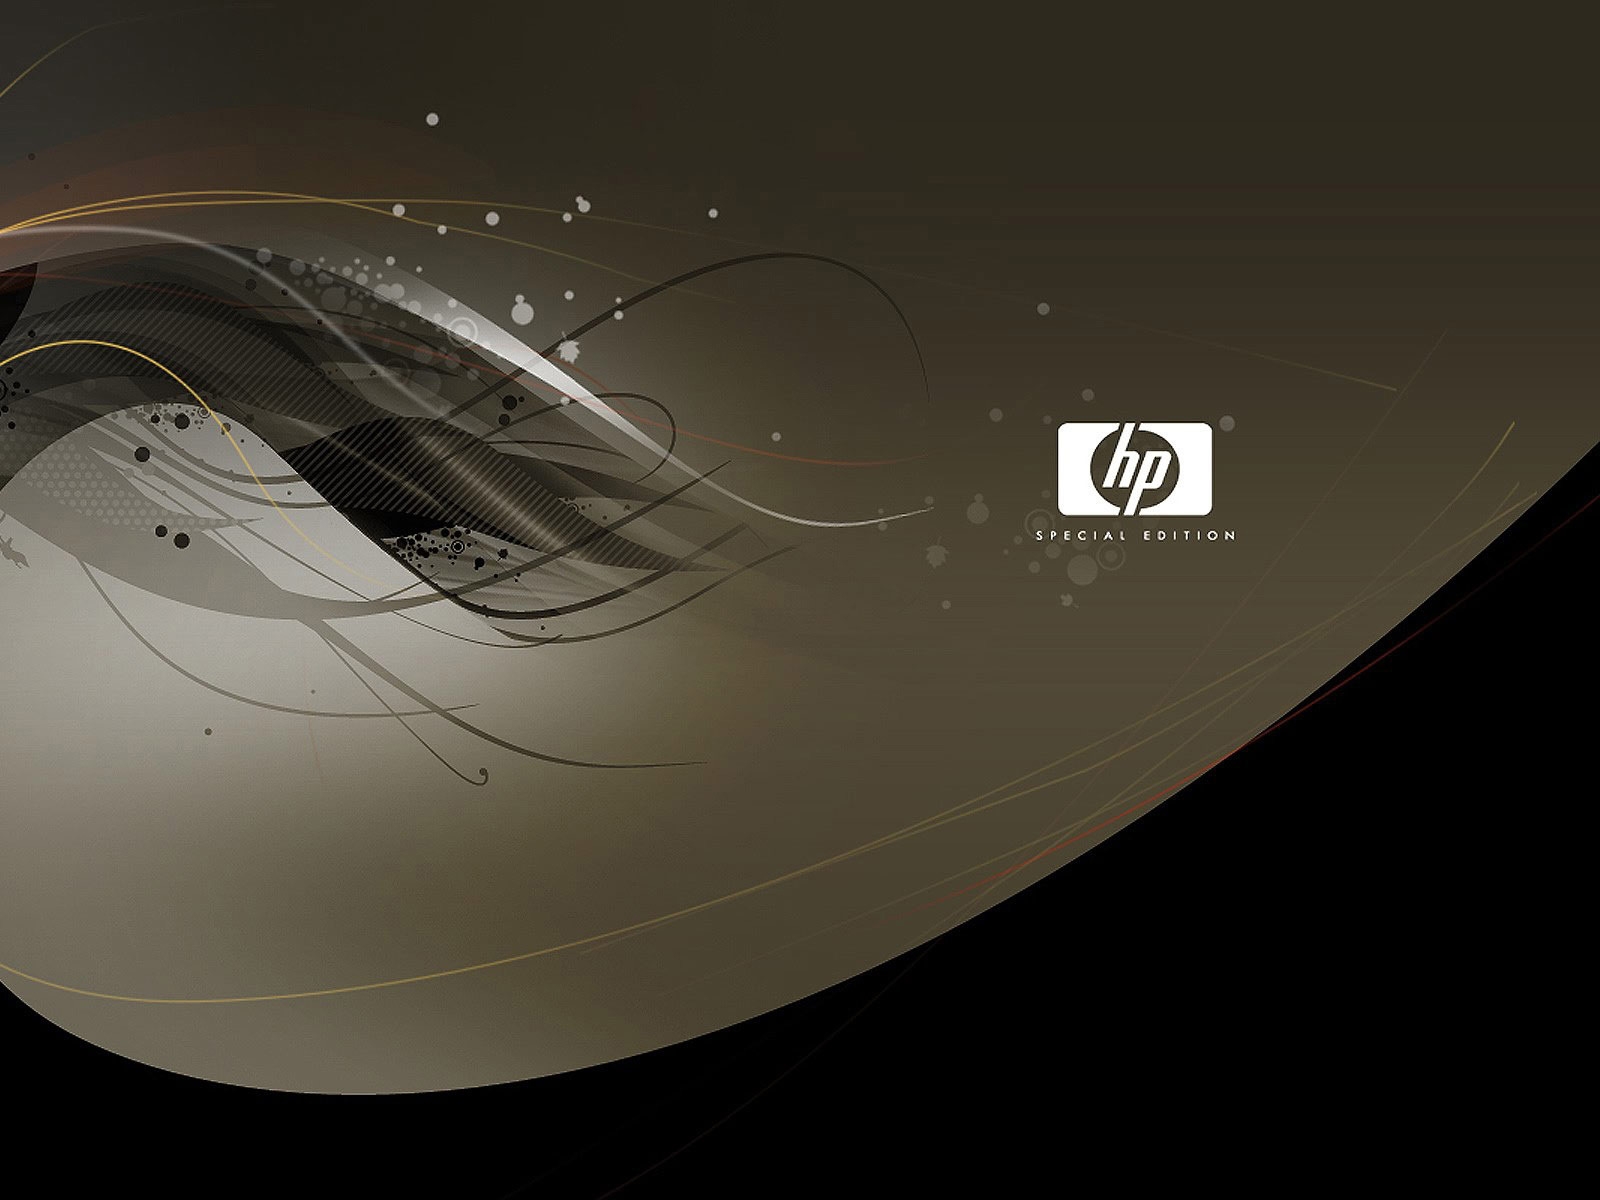 HP Special Edition for 1600 x 1200 resolution